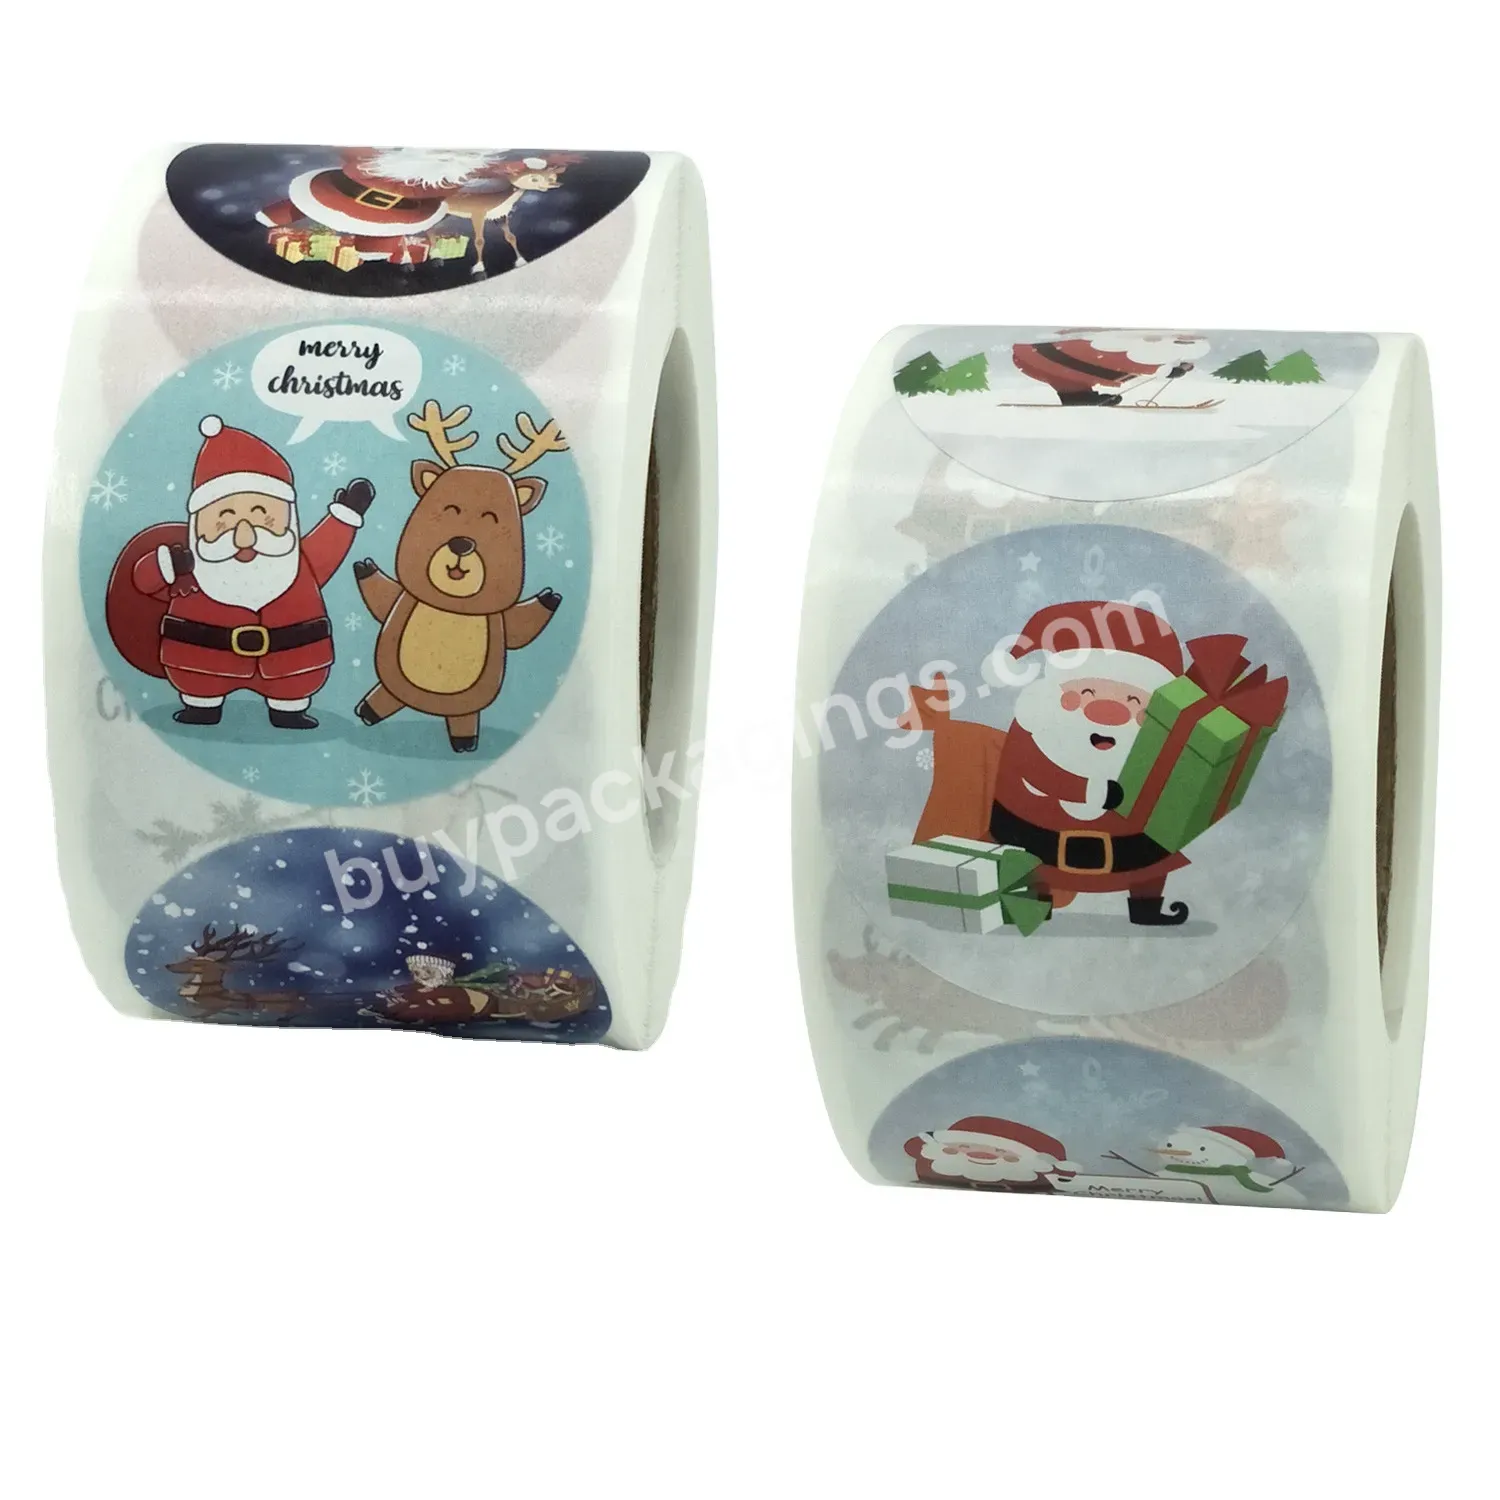 Santa Claus Merry Christmas Paper Sealing Label Stickers For Bakery Packaging Decoration Gifts Stationery - Buy Merry Christmas Sealing Label,Santa Claus Stickers,Packaging Decoration Gifts.